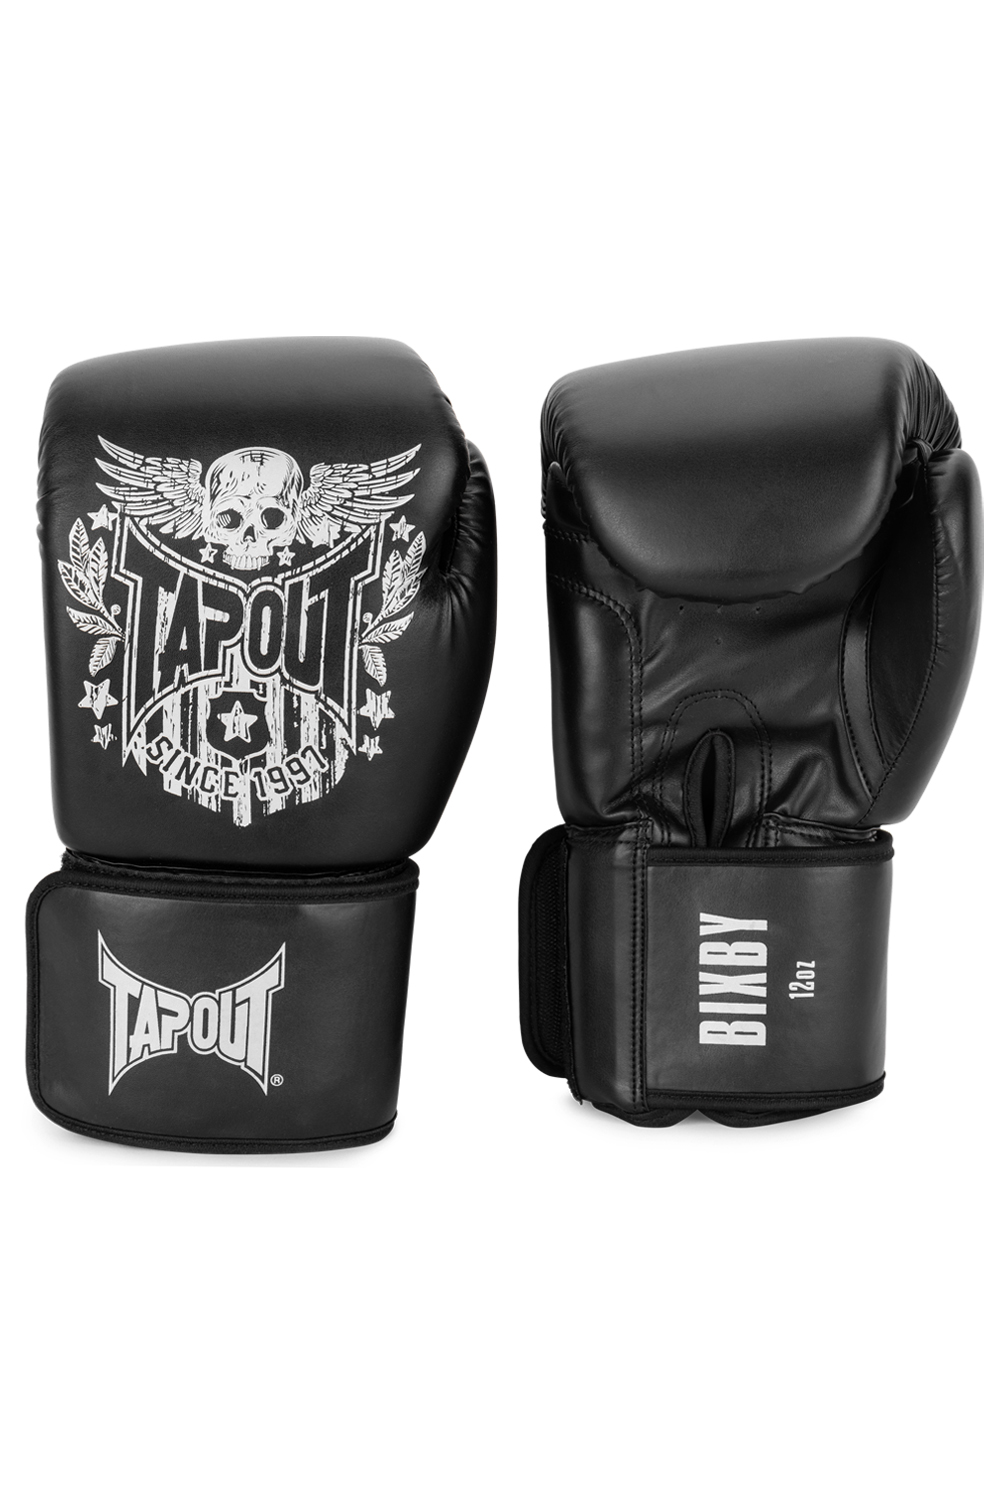 Tapout Artificial Leather Boxing Gloves (1pair)